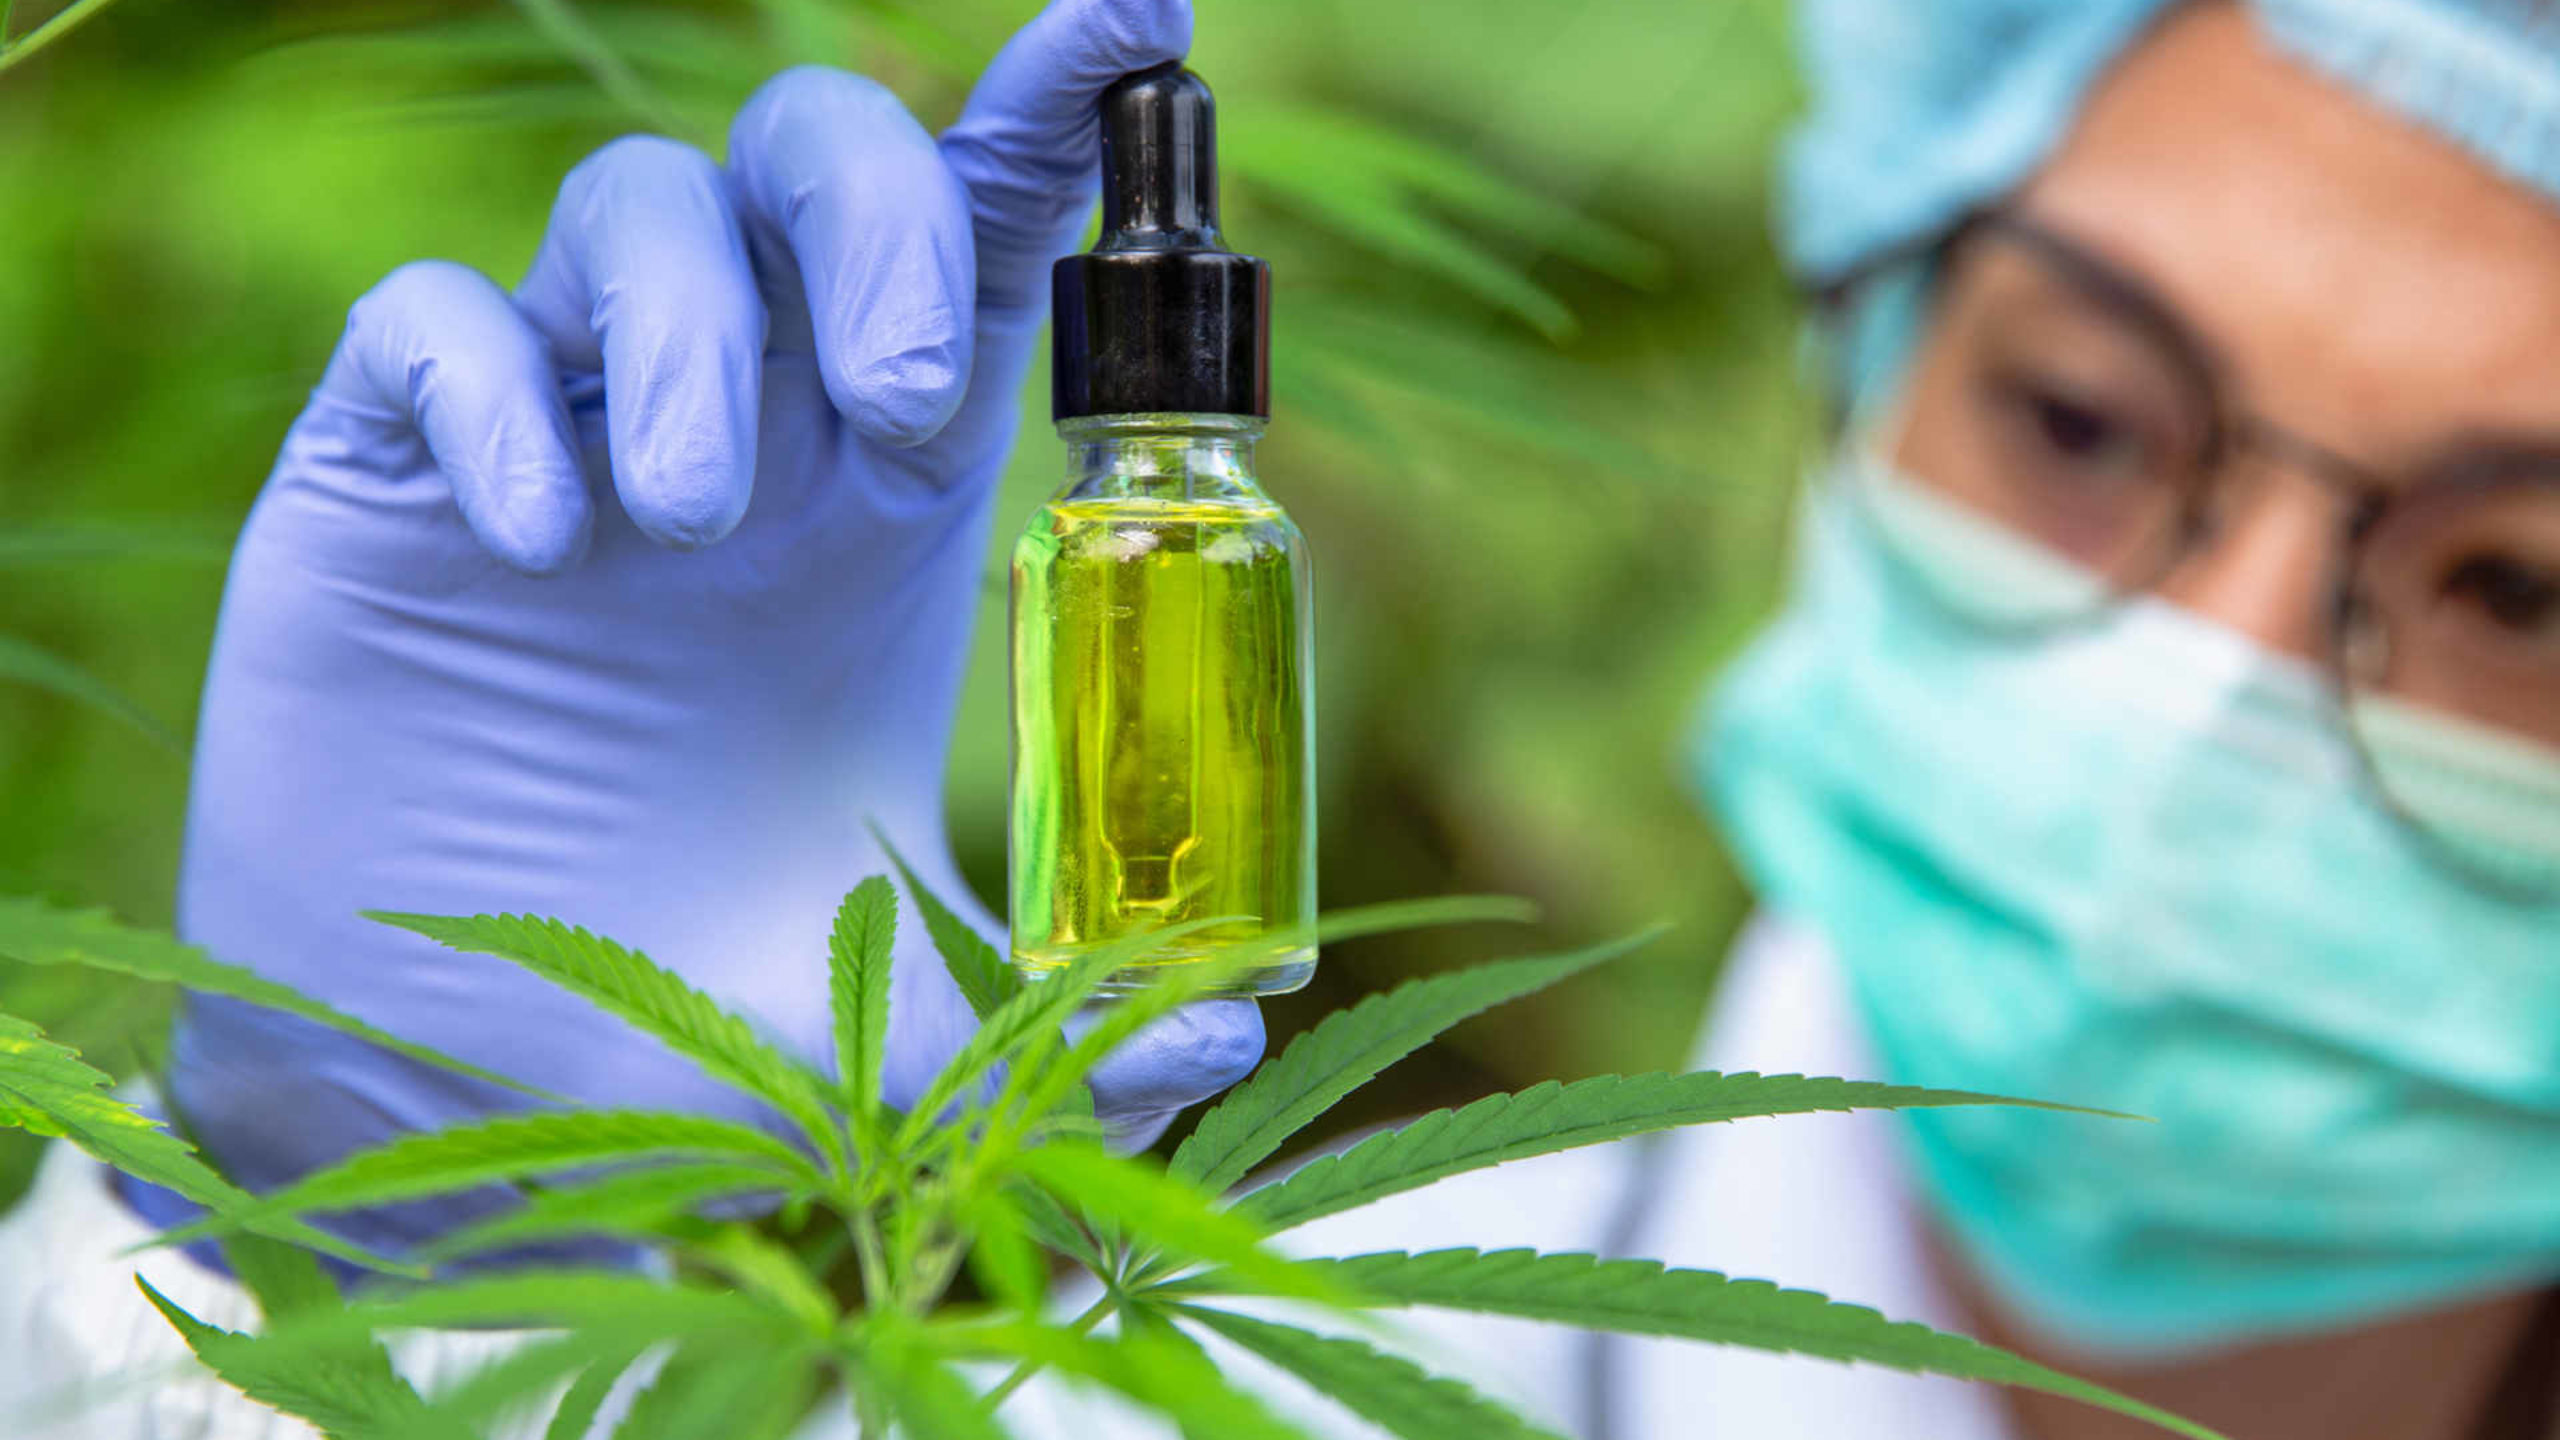 Potential of CBD Being Used in the Medical Industry